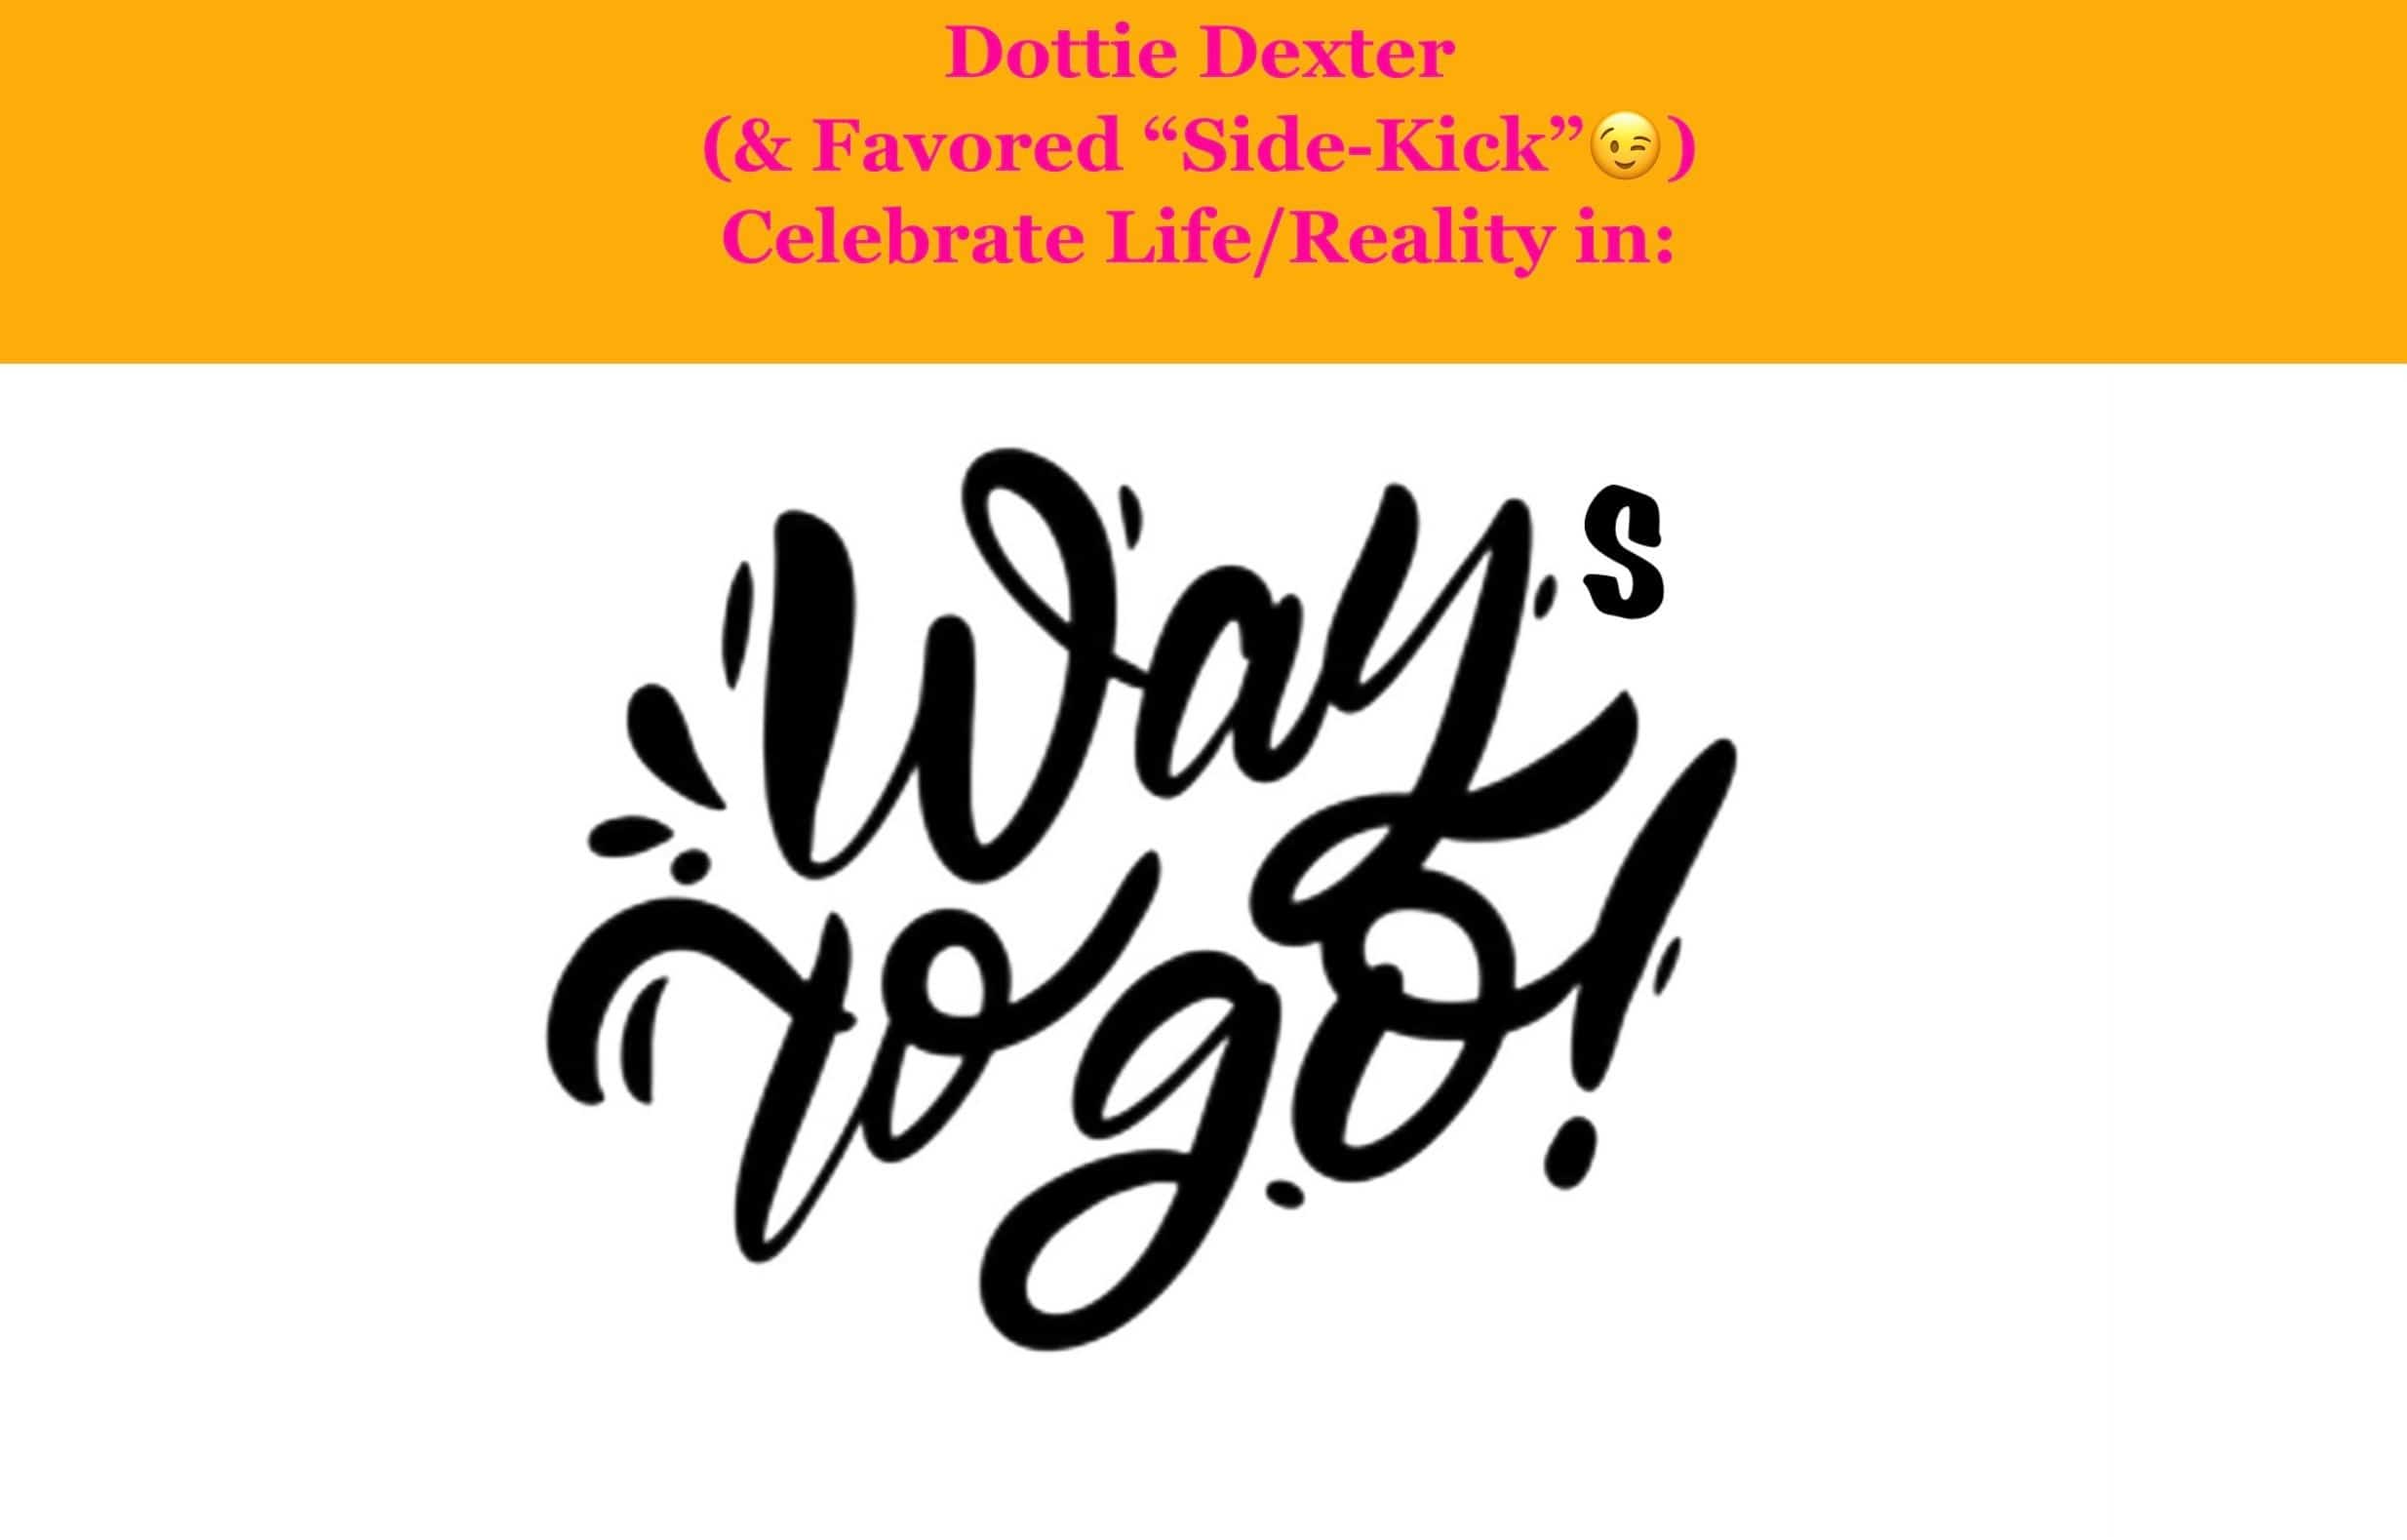 Dottie Dexter shows you  "Ways To Go" bringing real to reality!